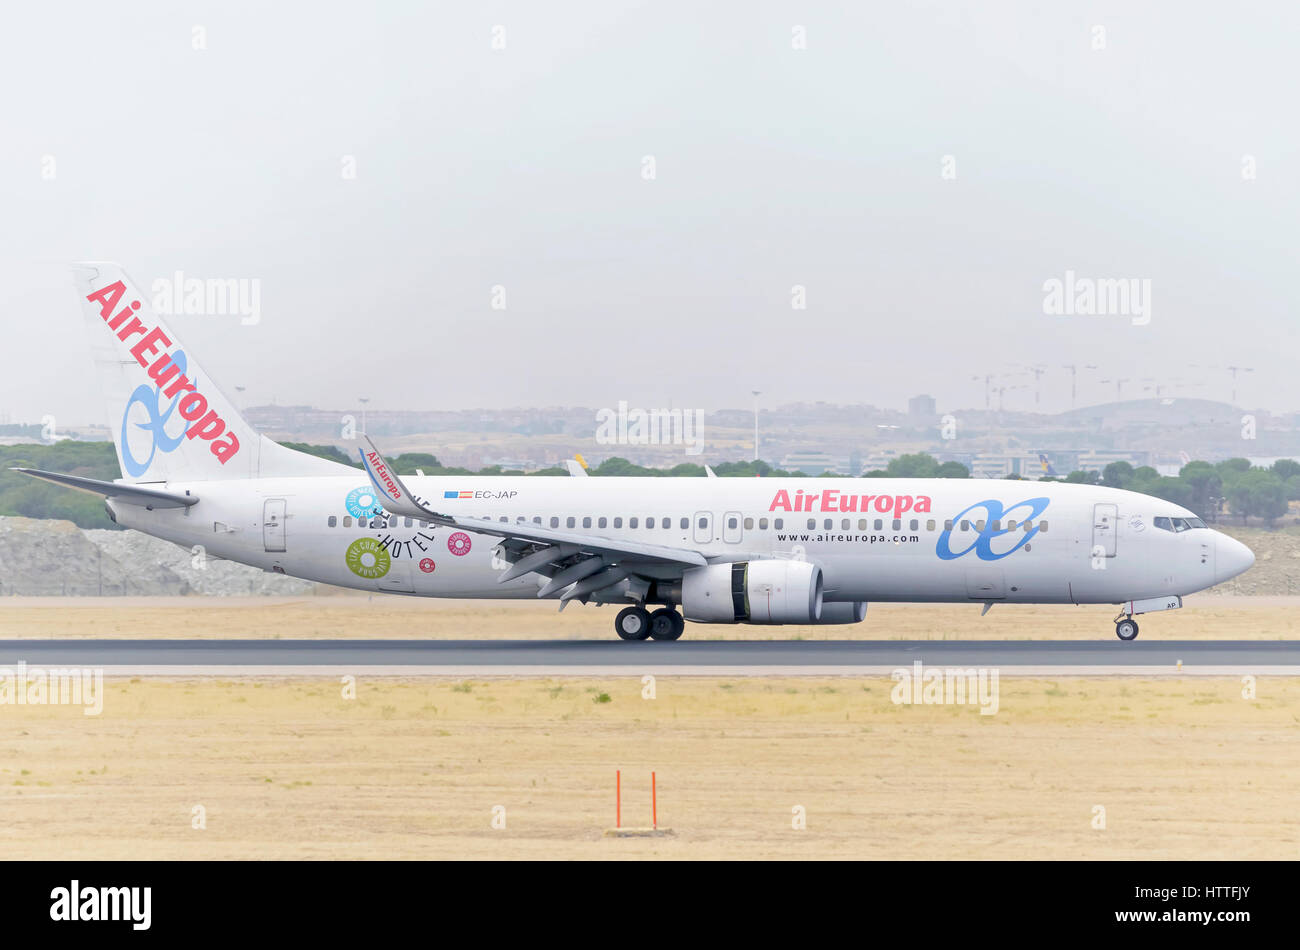 Plane Boeing 737, of Air Europa airline, is landing on Madrid - Barajas, Adolfo Suarez airport. Cloudy and hot day of summer. Stock Photo